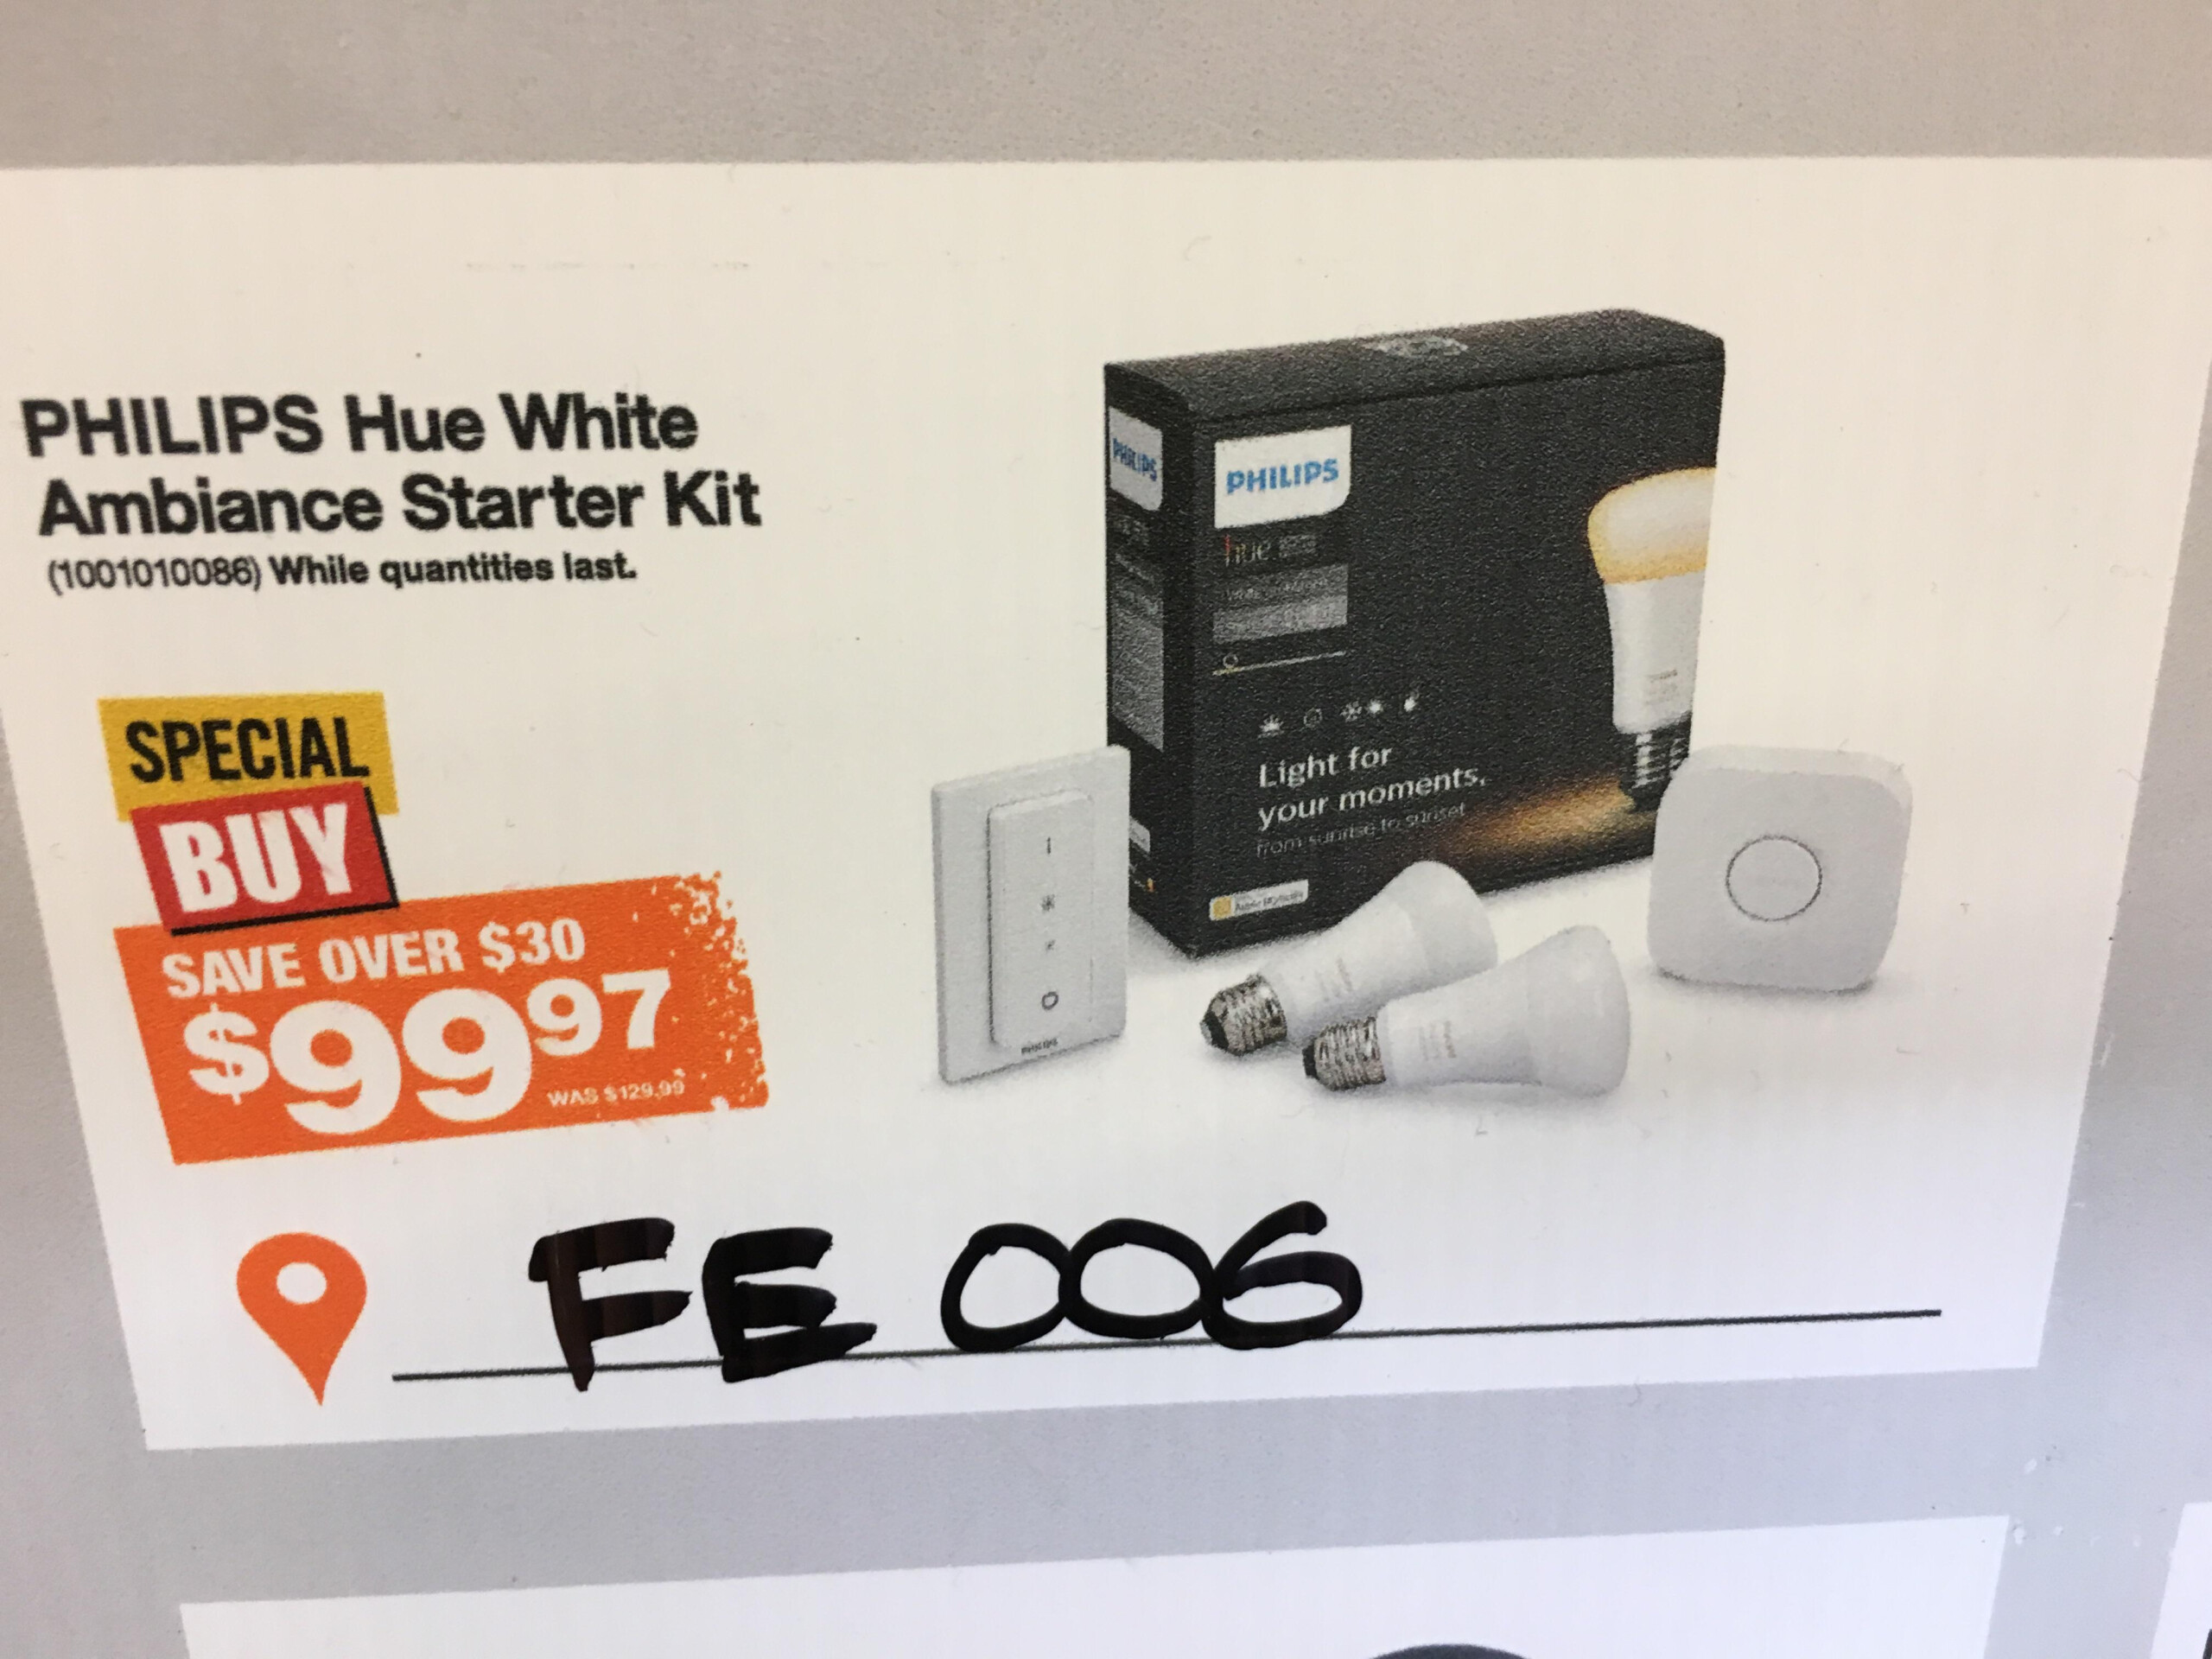 Seen At Home Depot In Markham Ontario You Can Get Another 5 00 Off